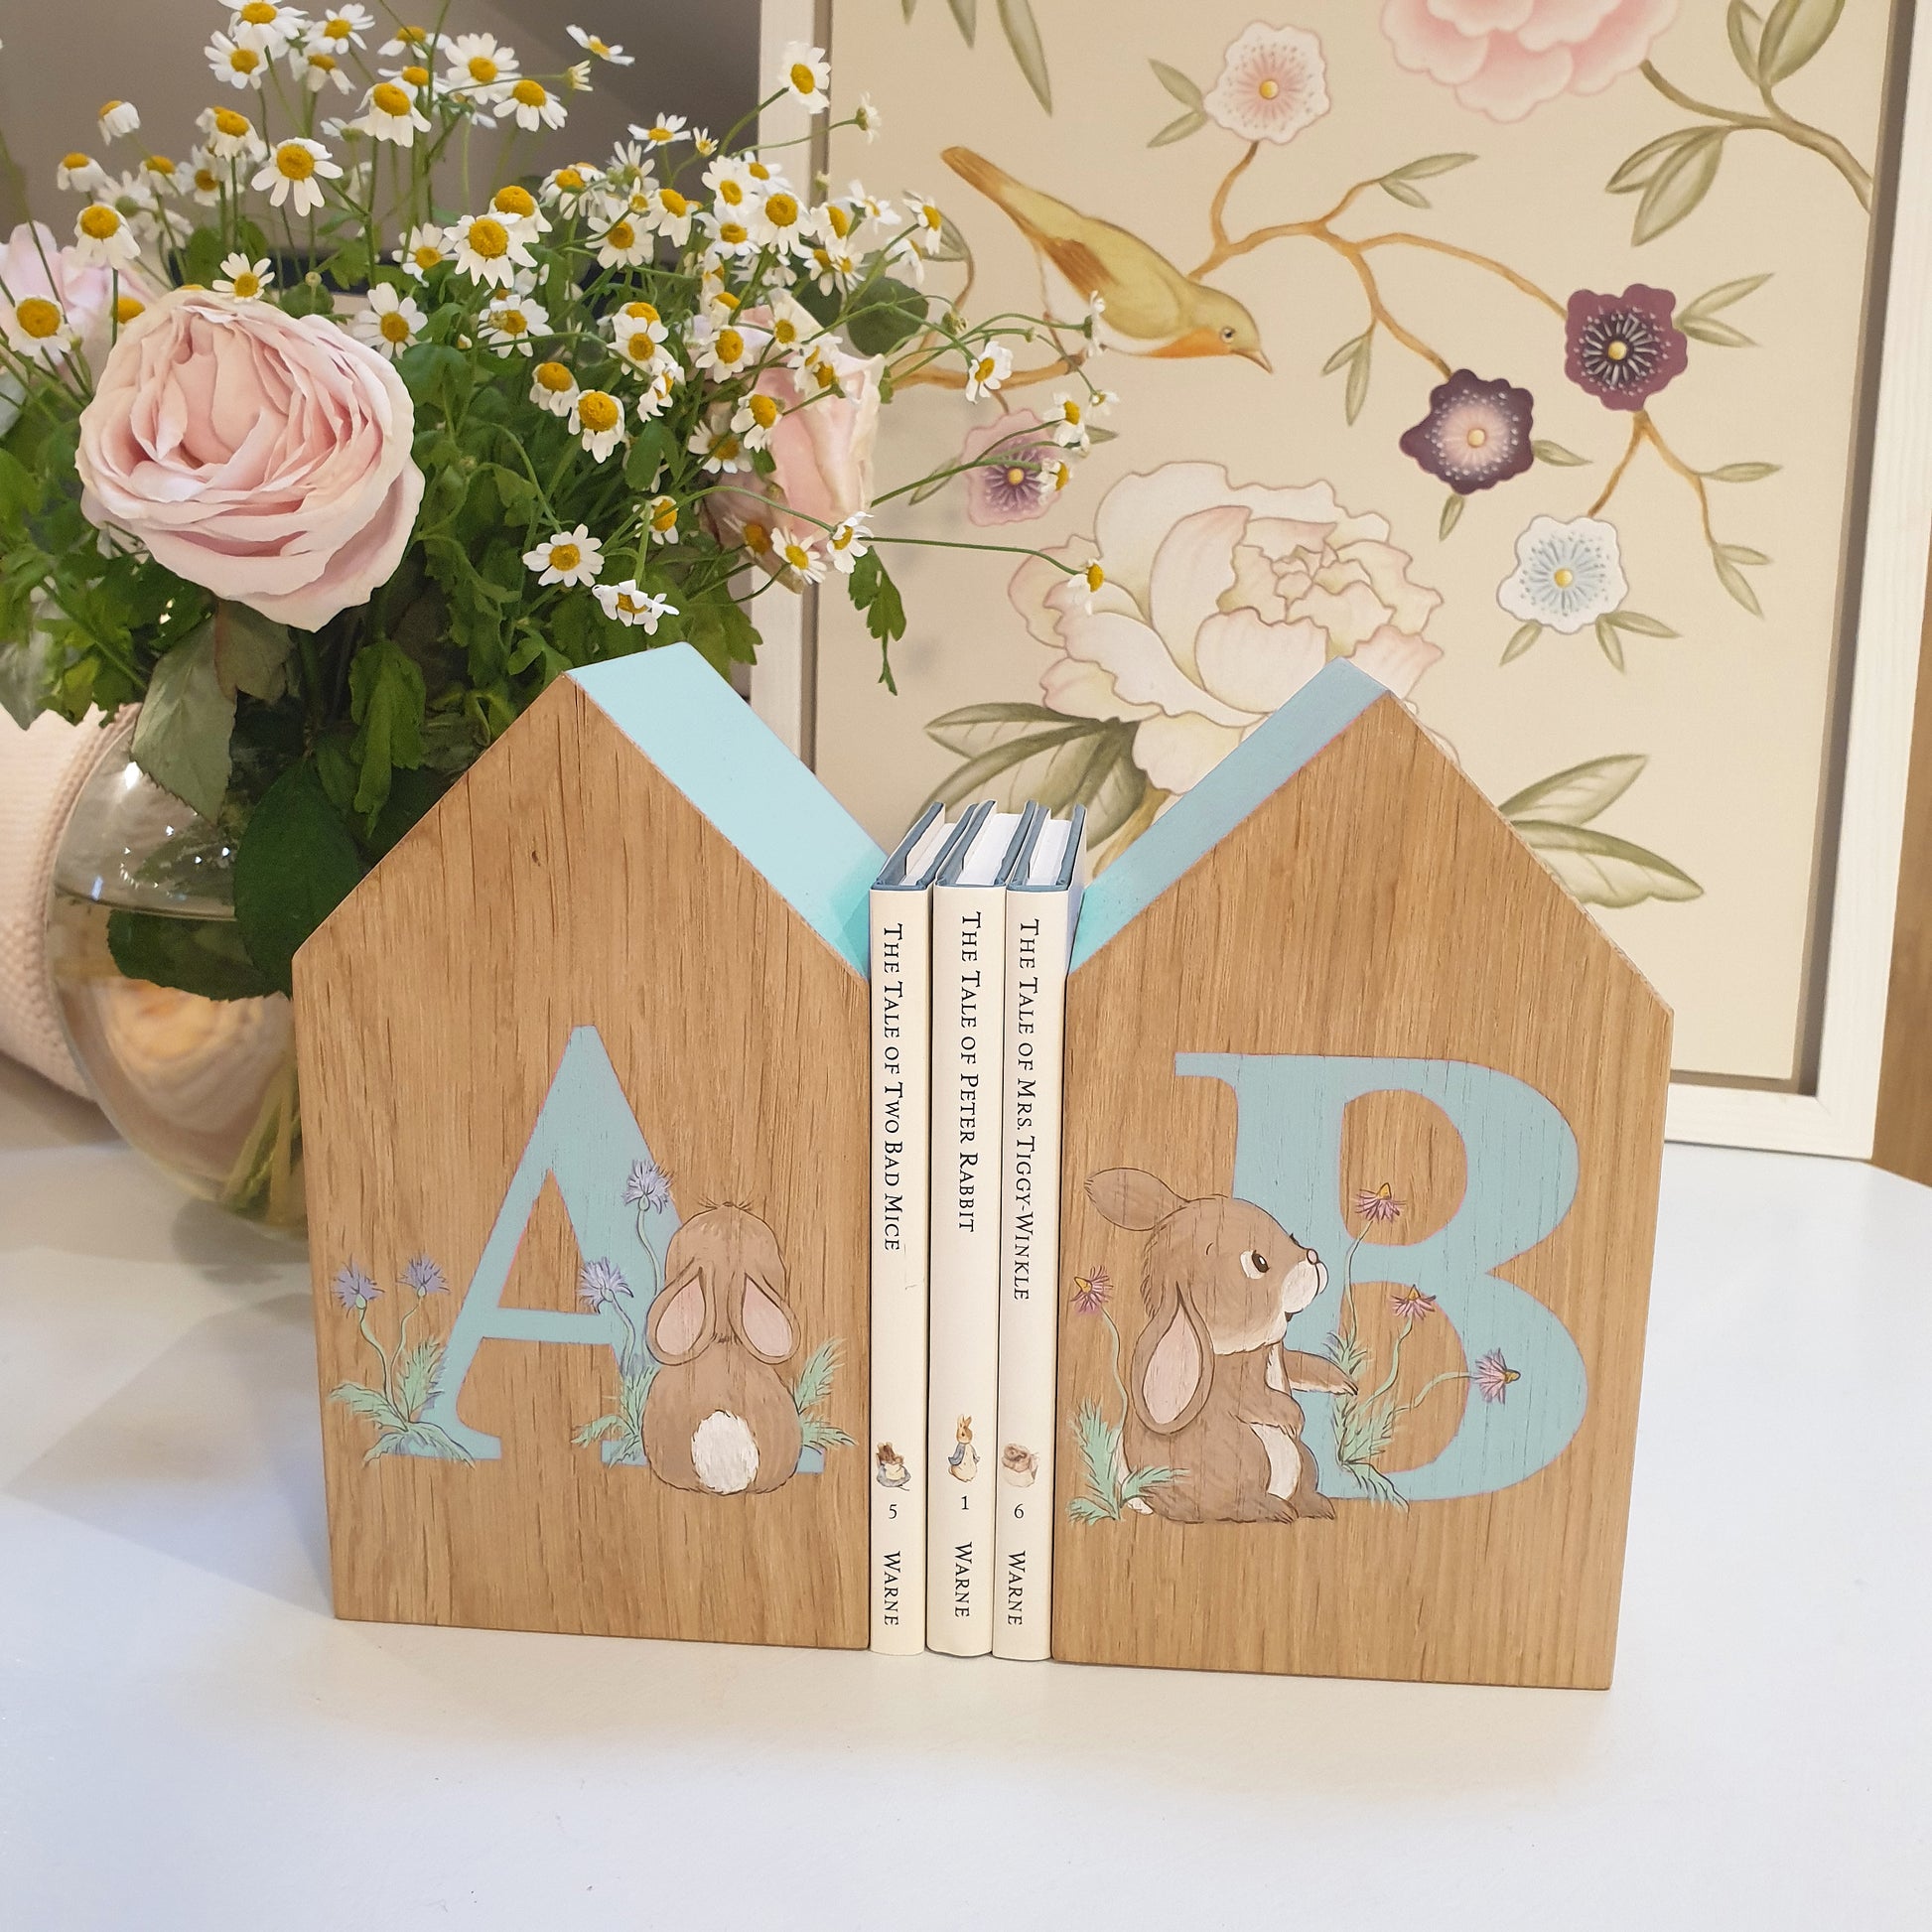 Personalised Oakhouse Bookends - Mimi and Noonoo with Blissful Blue Trim